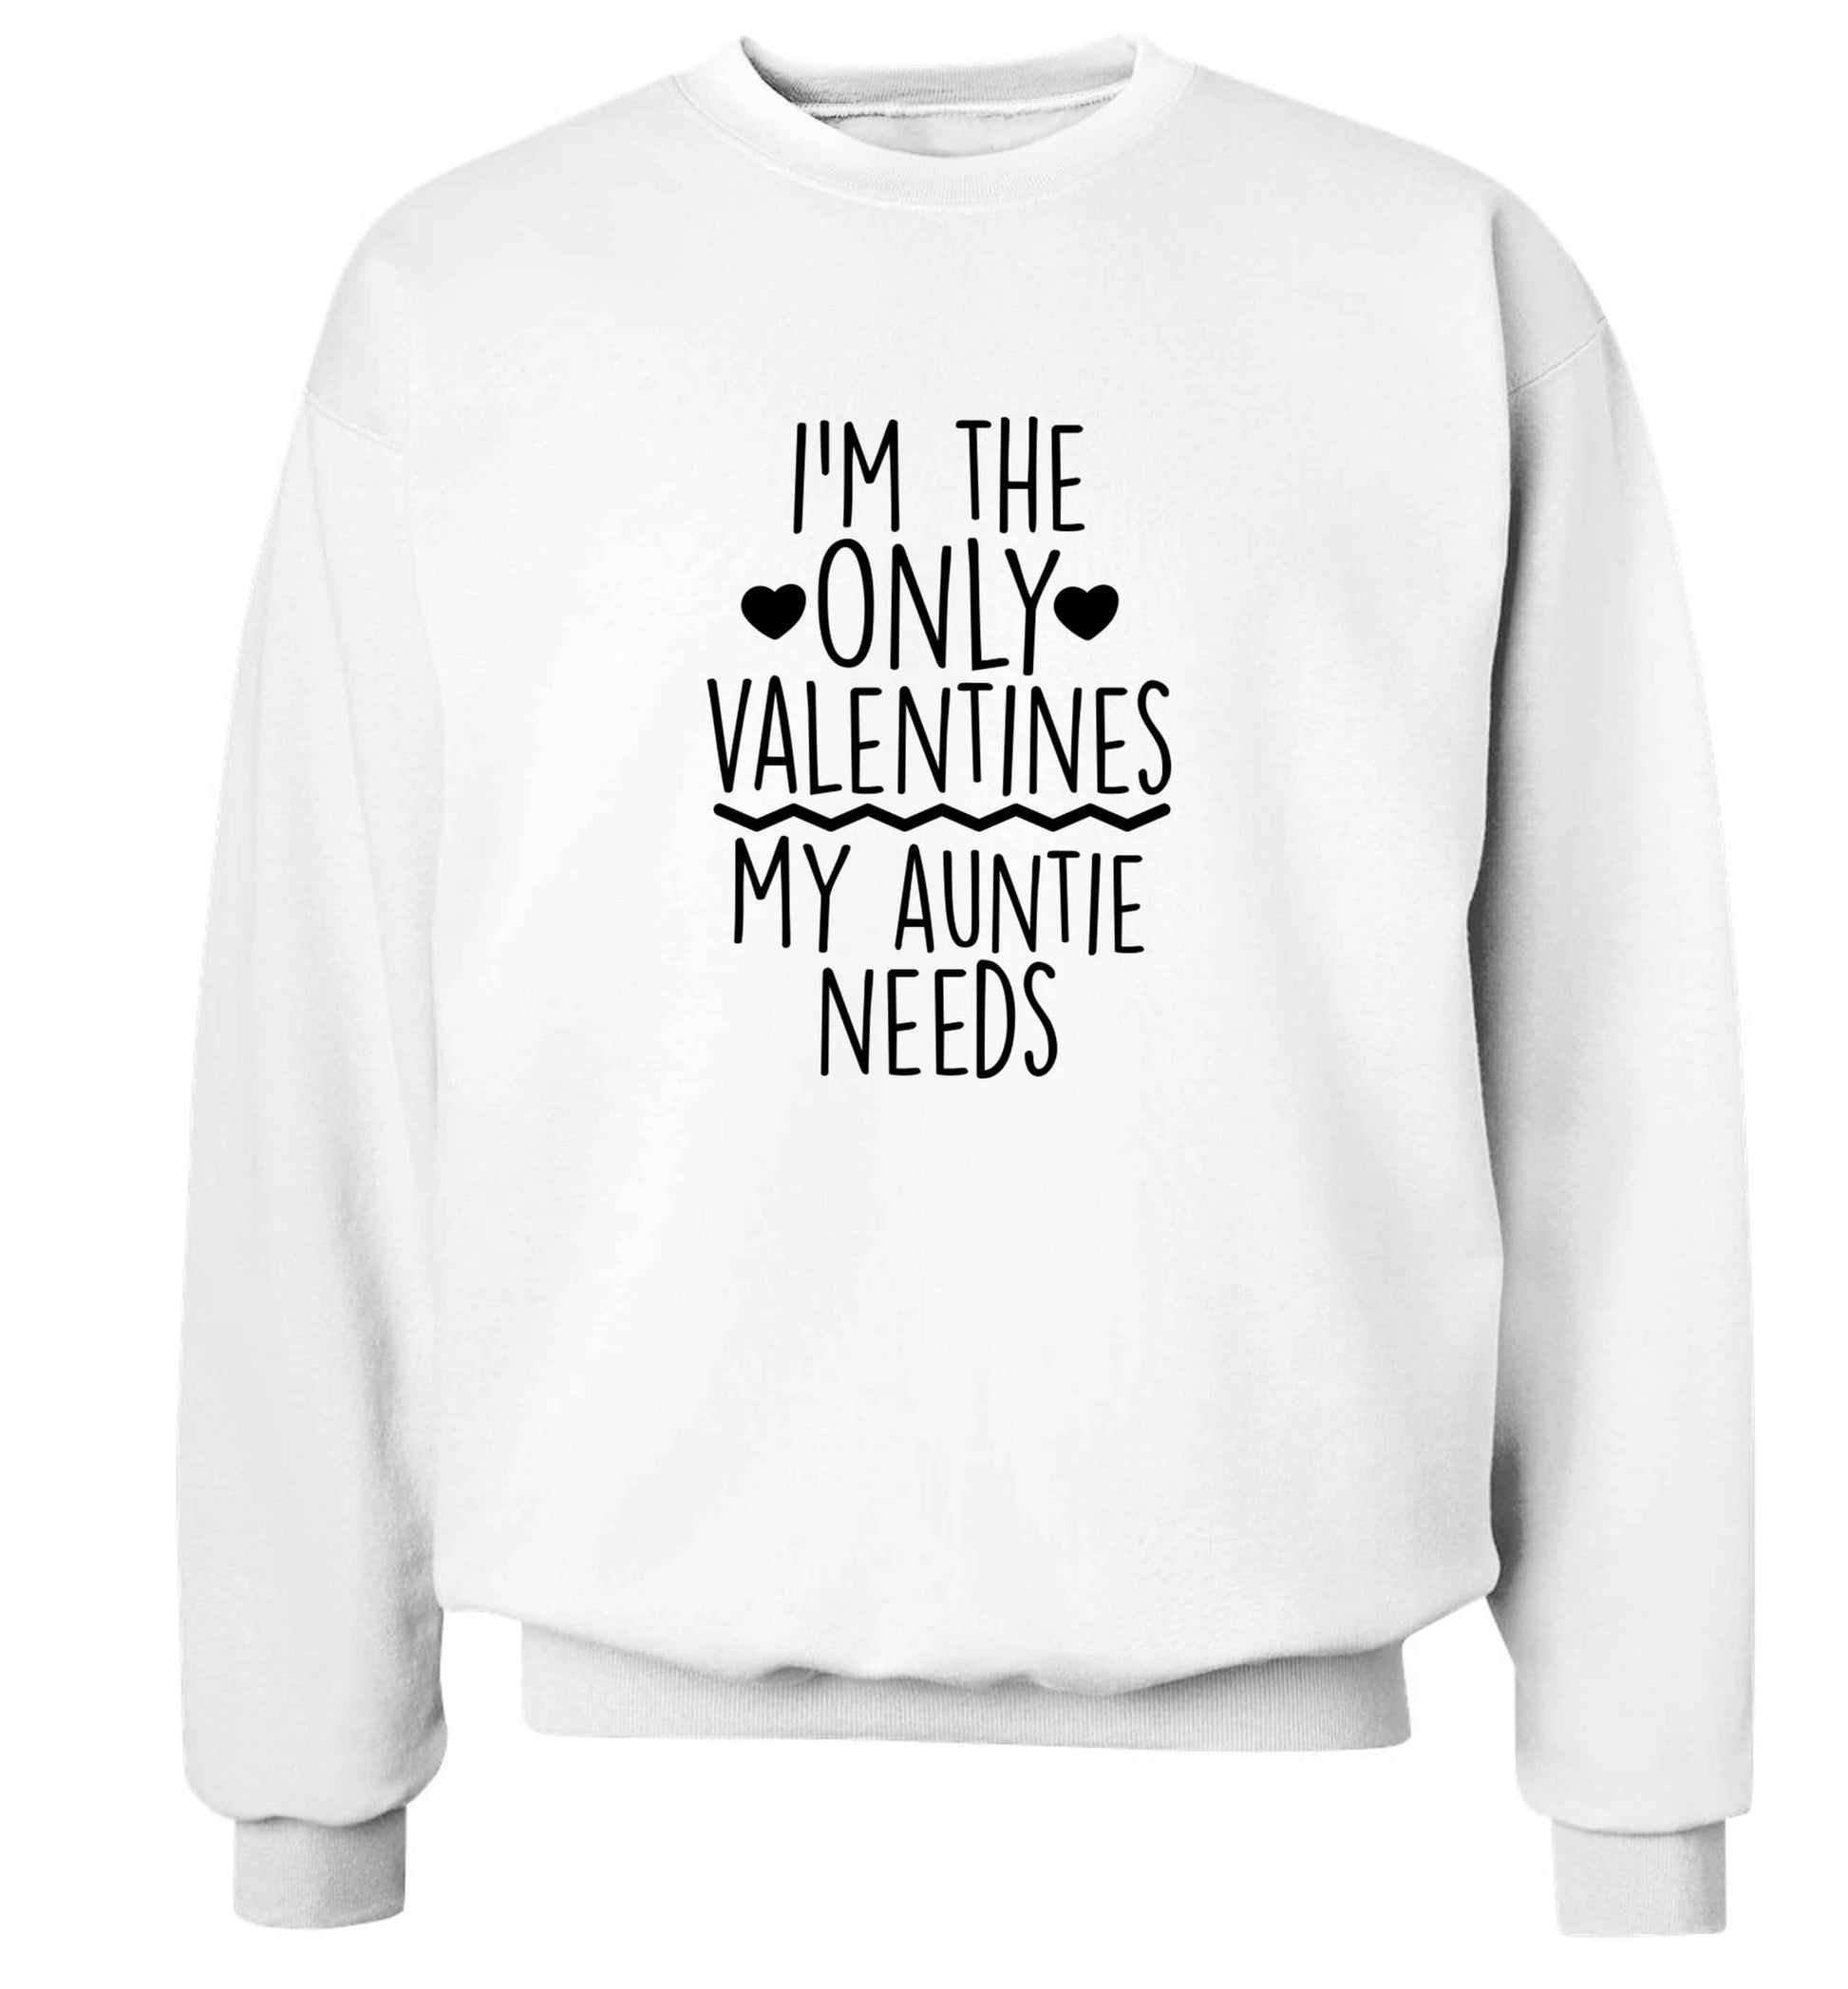 I'm the only valentines my auntie needs adult's unisex white sweater 2XL